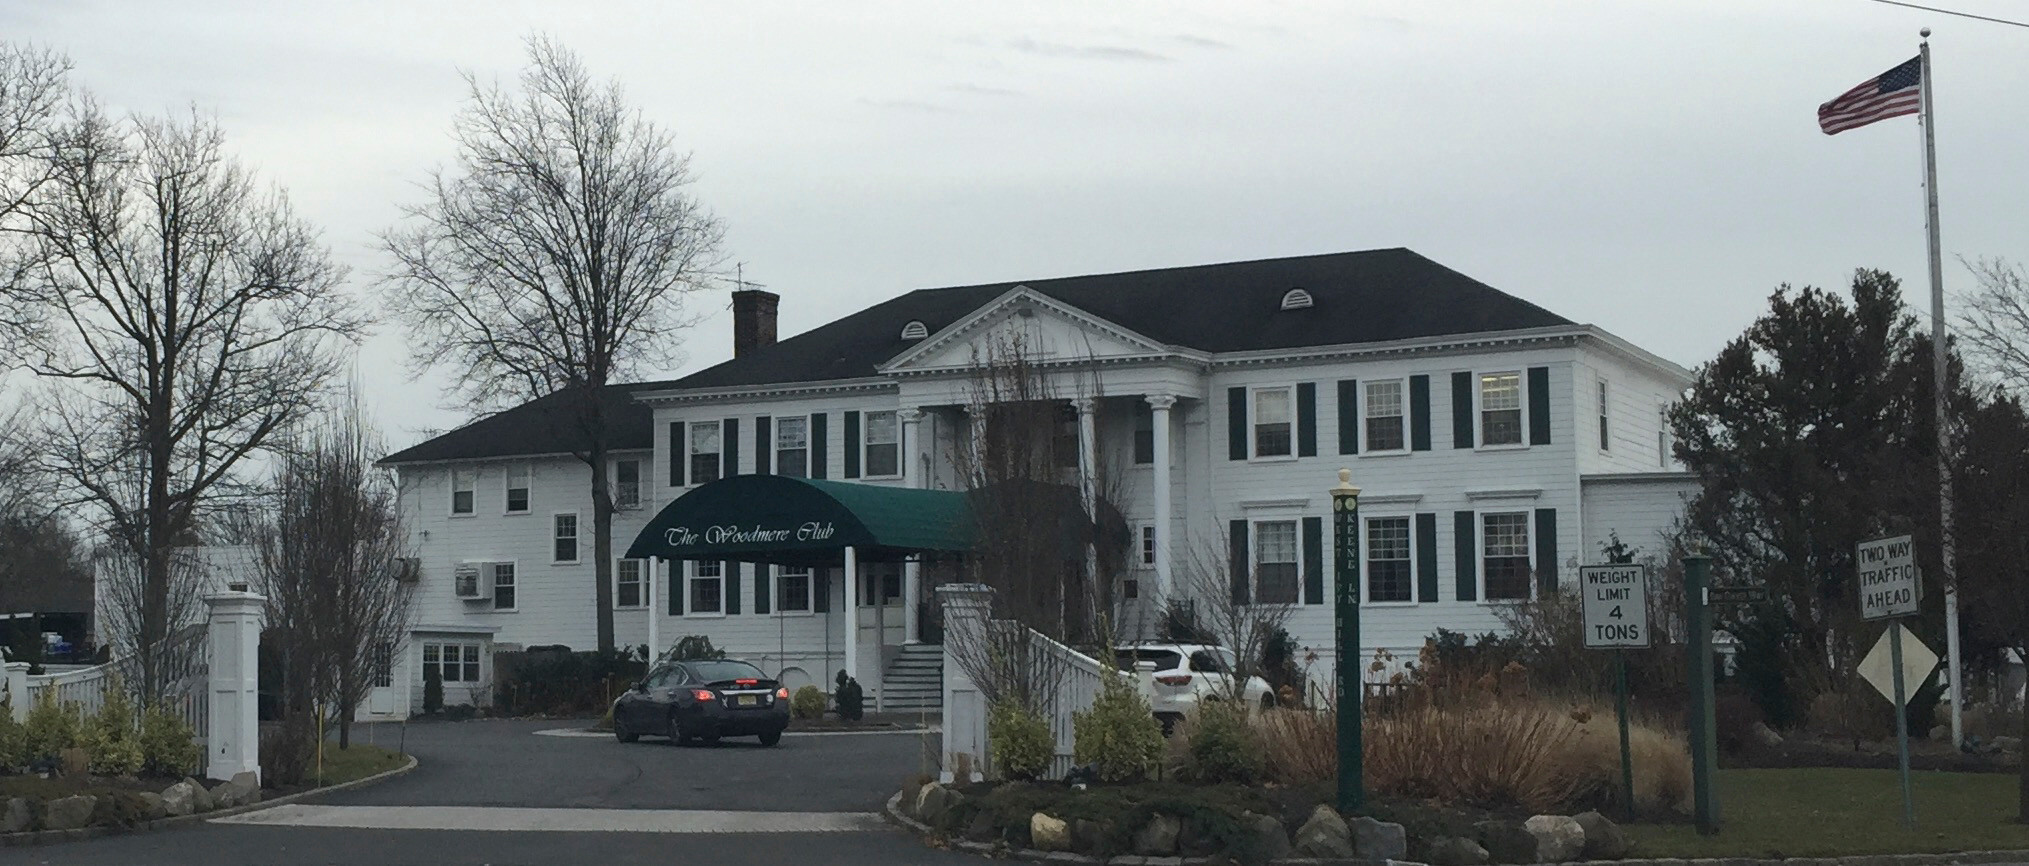 Weiss Properties and 2020 Acquisitions bought the Woodmere Club. It will remain open for five more years.